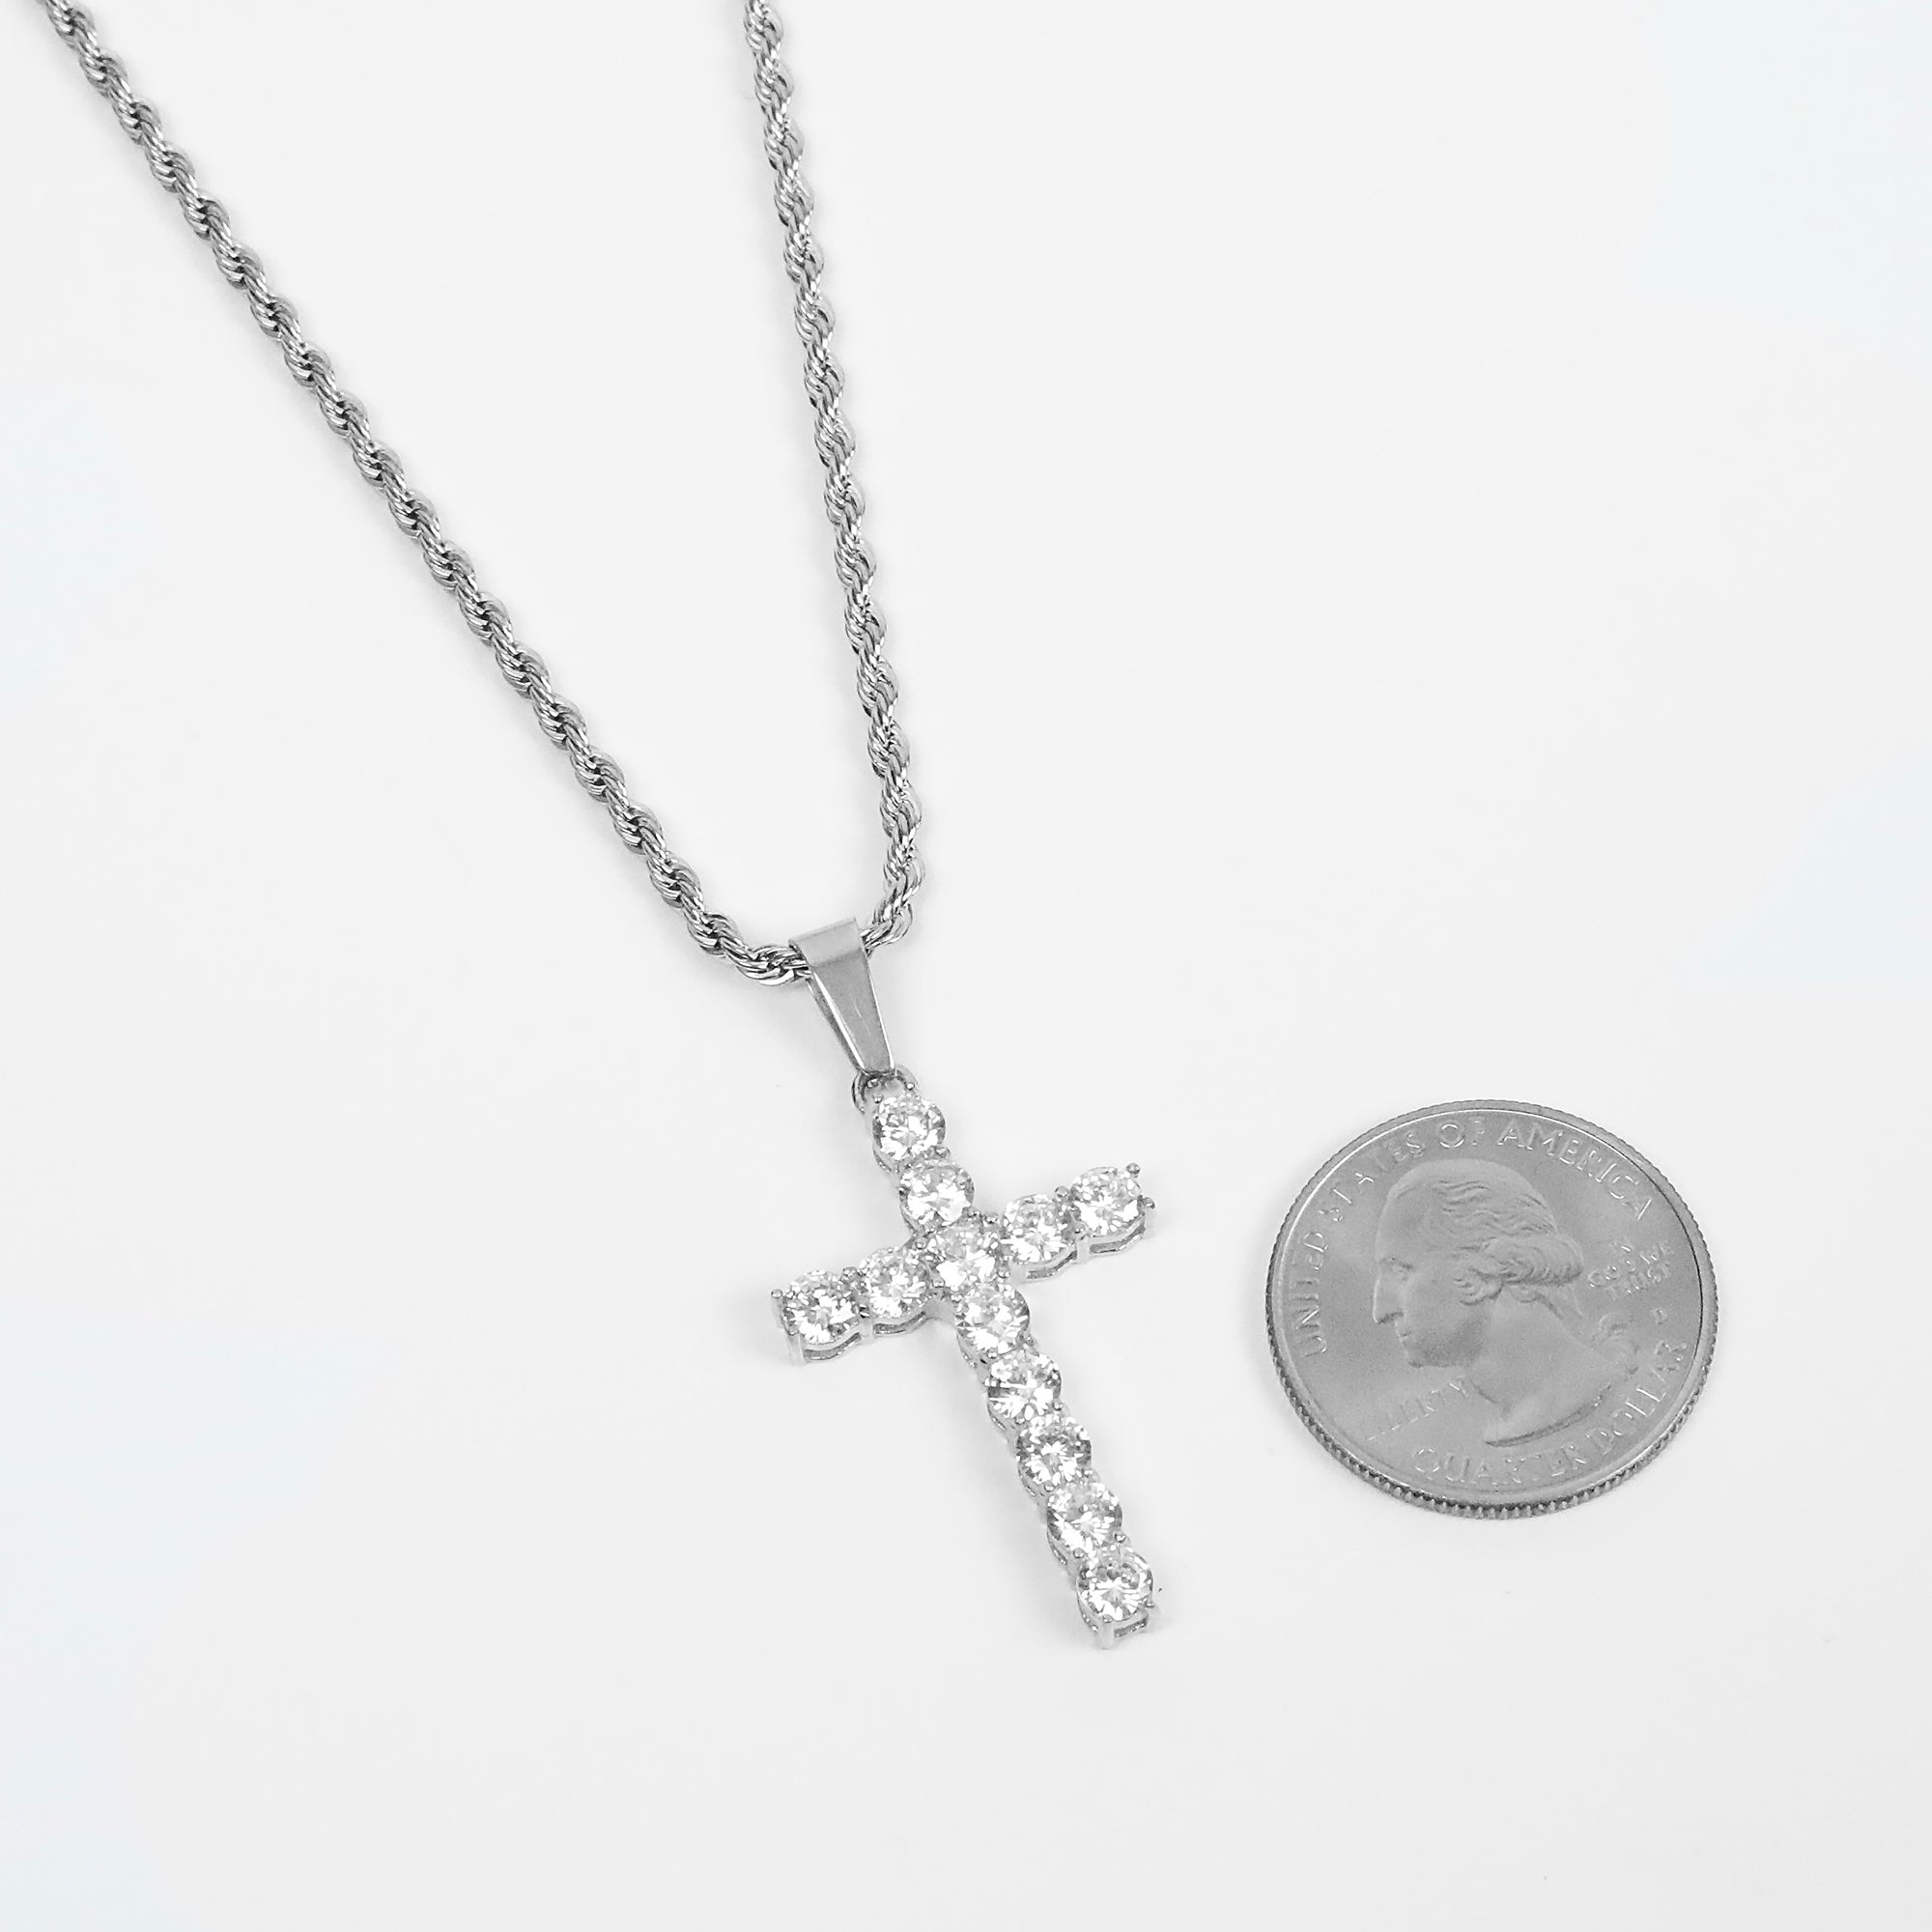 Ice Cross Necklace - Silver